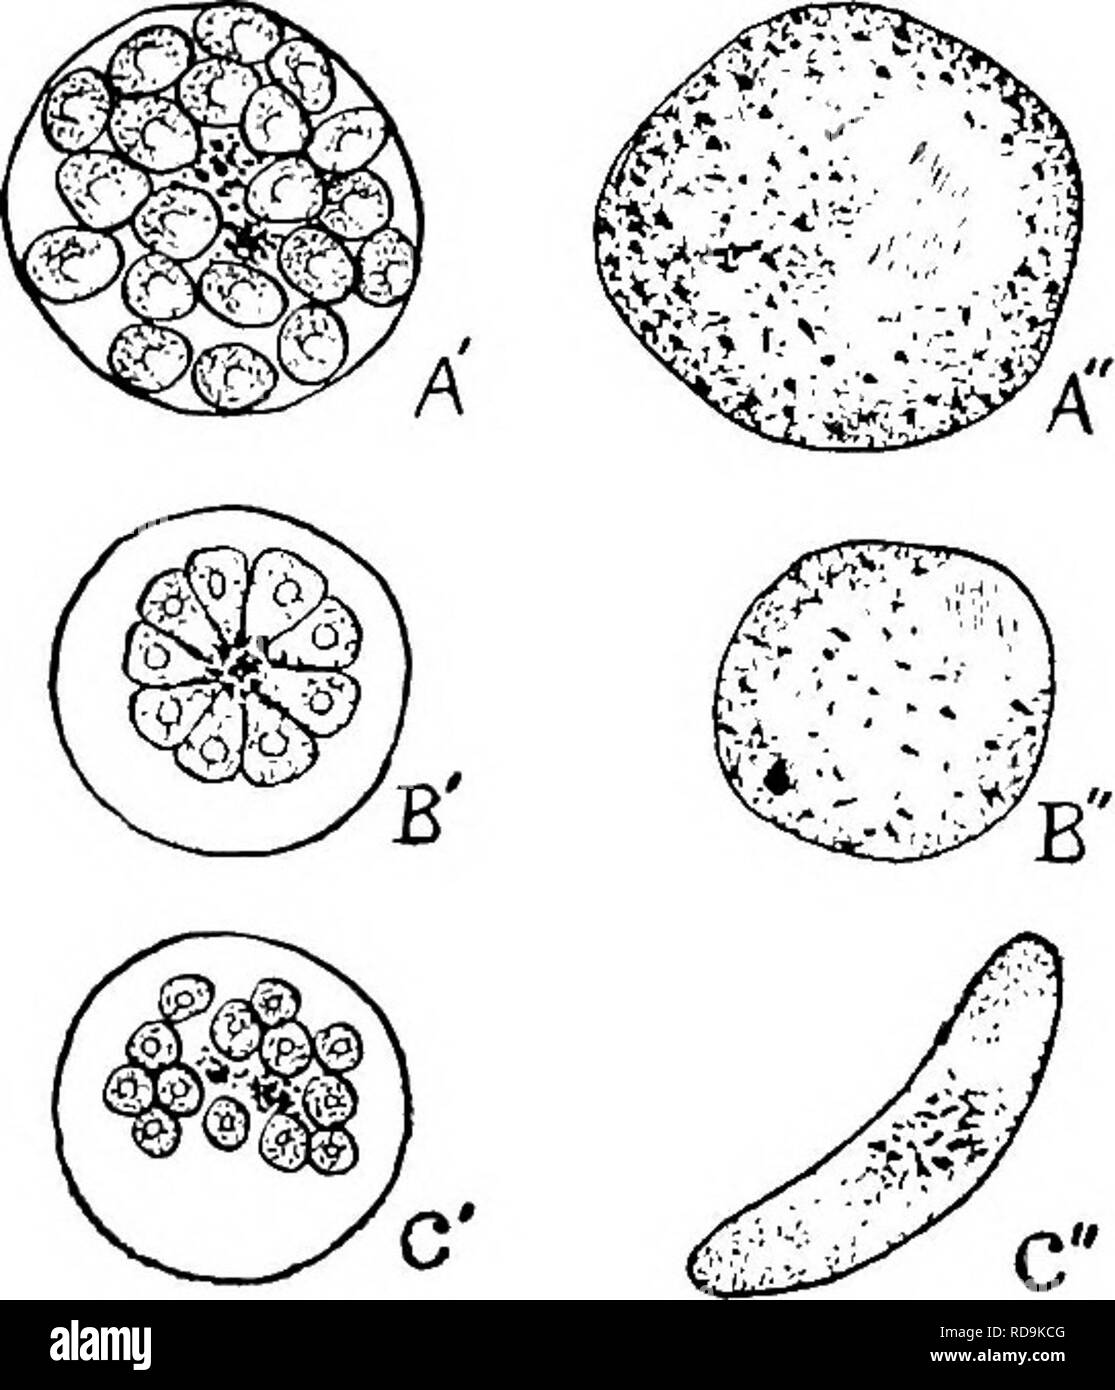 . Animal parasites and human disease. Medical parasitology; Insects as carriers of disease. Fig. 47. Comparison of three species of malaria parasites x 2000 (figures selected largely from Manson). A, A' and A&quot;, Plasmodium vivax; B, B' and B&quot;, Plasmodium malariae; C, C and C&quot;, Plasmodium falciparum. A, B and C, mature parasites in red corpuscles. A', B' and C, segmented parasites ready to leave corpuscles. A&quot;, B&quot; and C , mature gametocytes. The quartan parasite more closely resembles the tertian para- site in flexibility of body and form of gametocytes (Fig. 47C&quot;), Stock Photo